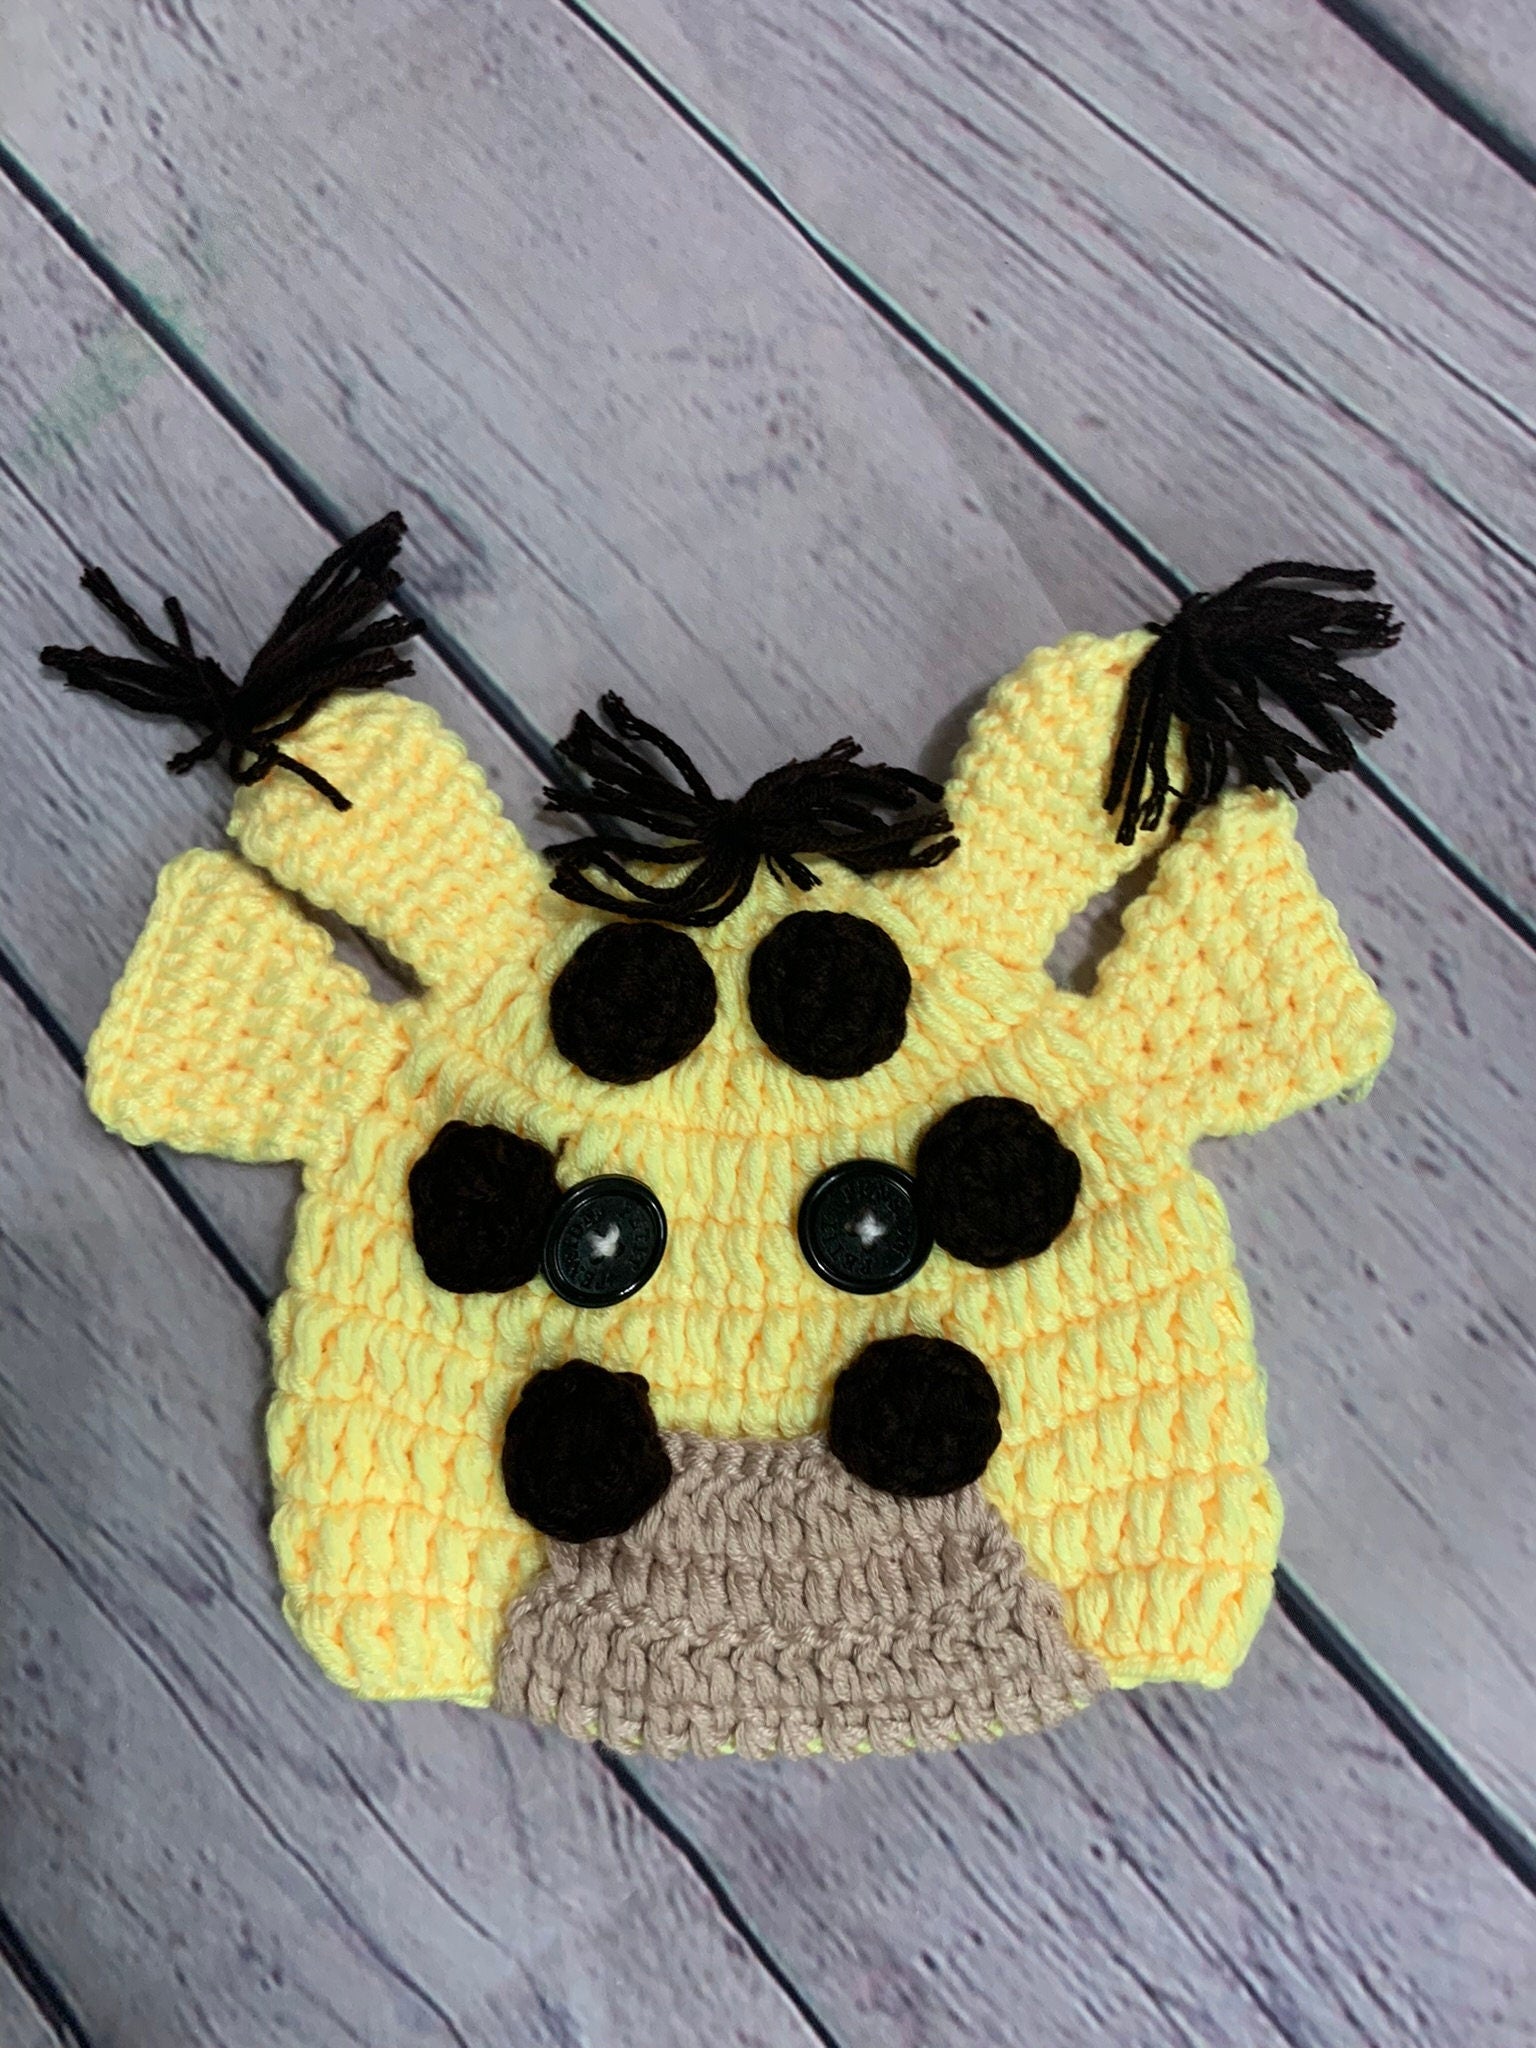 Tiny Baby Giraffe Crochet Outfit - Adorable Newborn Halloween Costume - TinySweetPeaBoutique